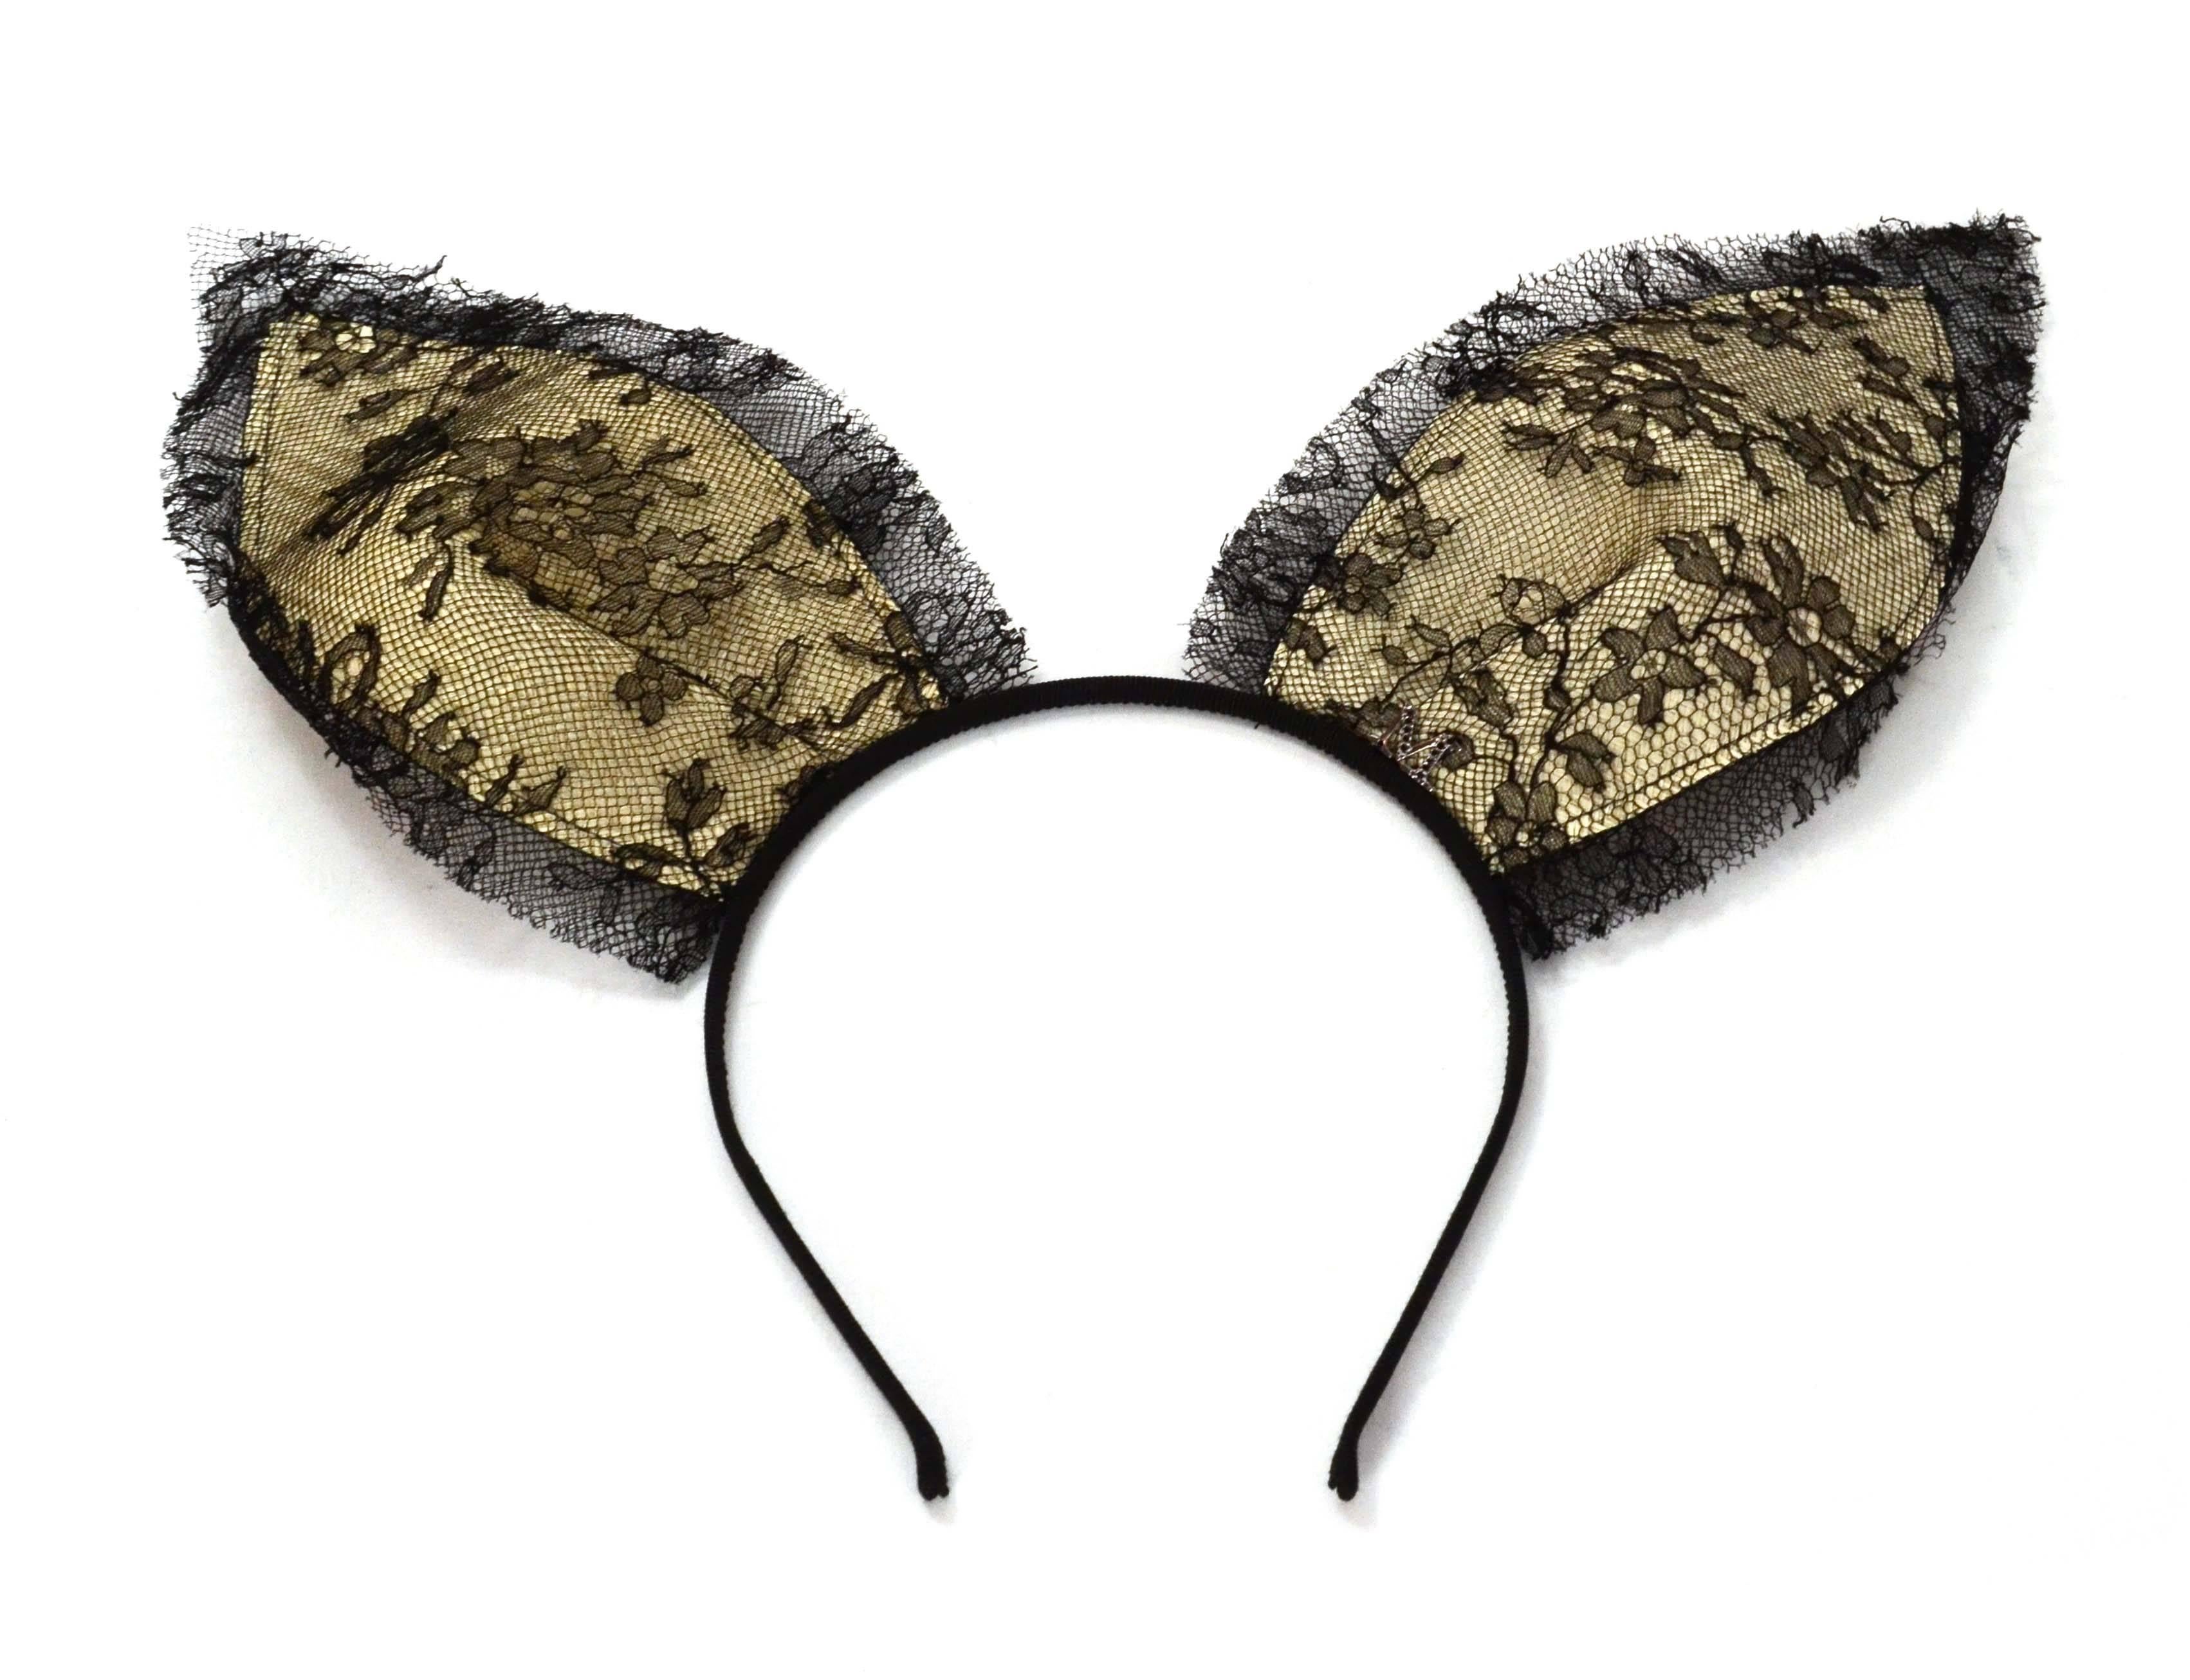 Maison Michel Black Lace 'Heidi' Bunny Ear Headband 
Lace features raw edges and ears feature a woven straw underlay
Made In: France
Color: Black and off-white
Composition: Lace, straw and grosgrain
Retail Price: $725 + tax
Overall Condition: